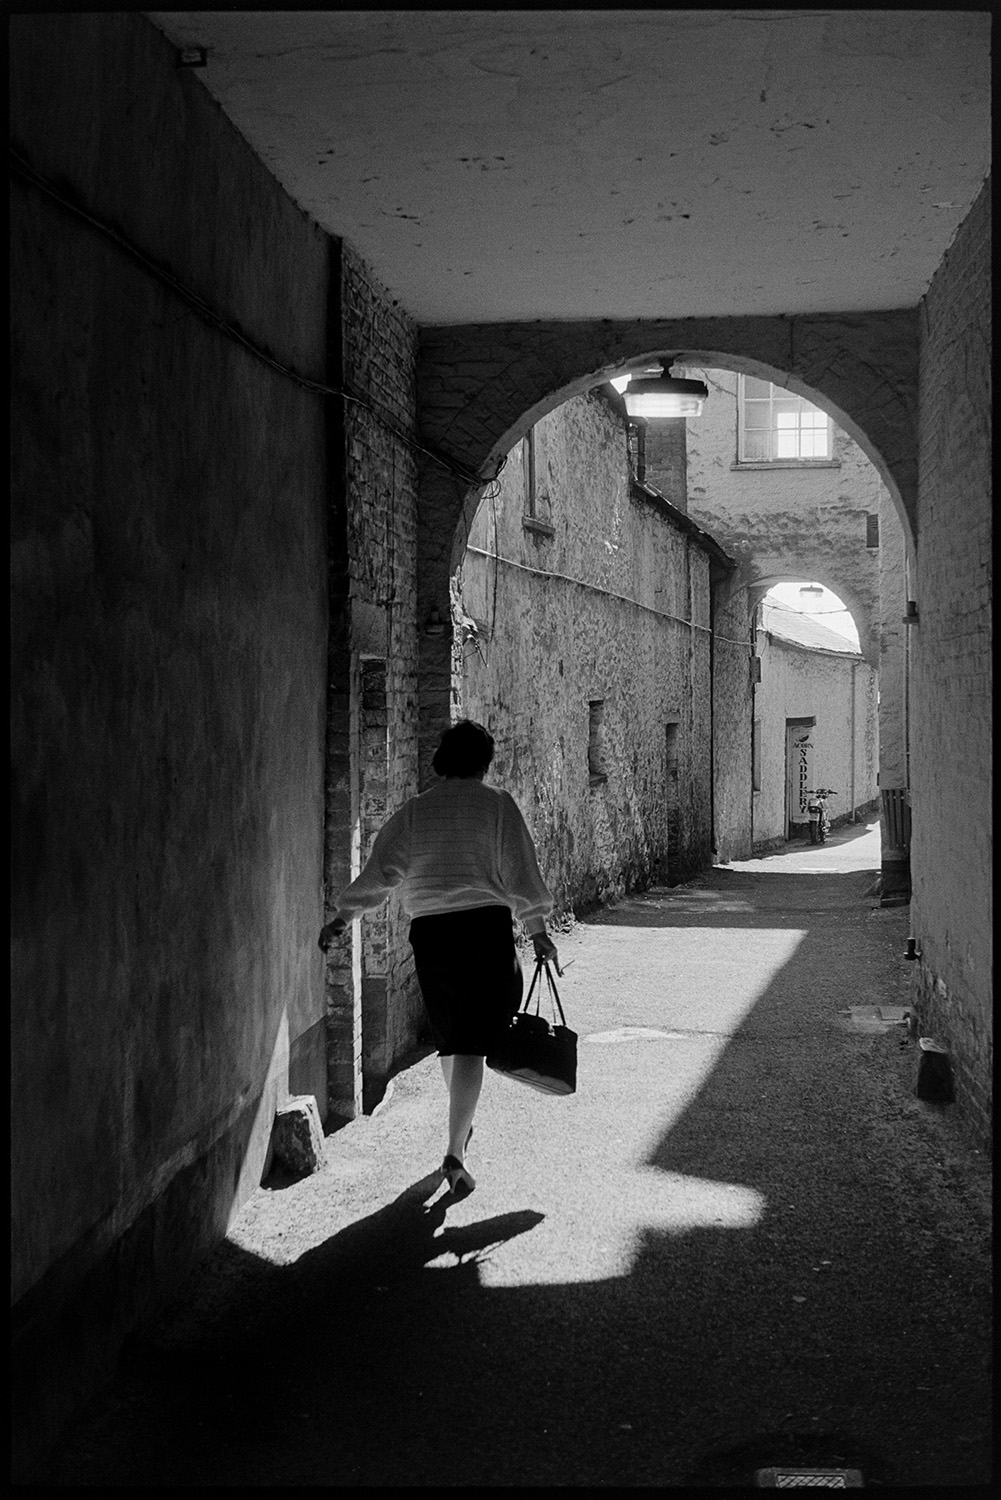 Covered alleyway with passers by, sunlight. 
[A woman carrying a bag walking through an arched alleyway by South Molton Town Hall. Sunlight is shining into the alleyway.]